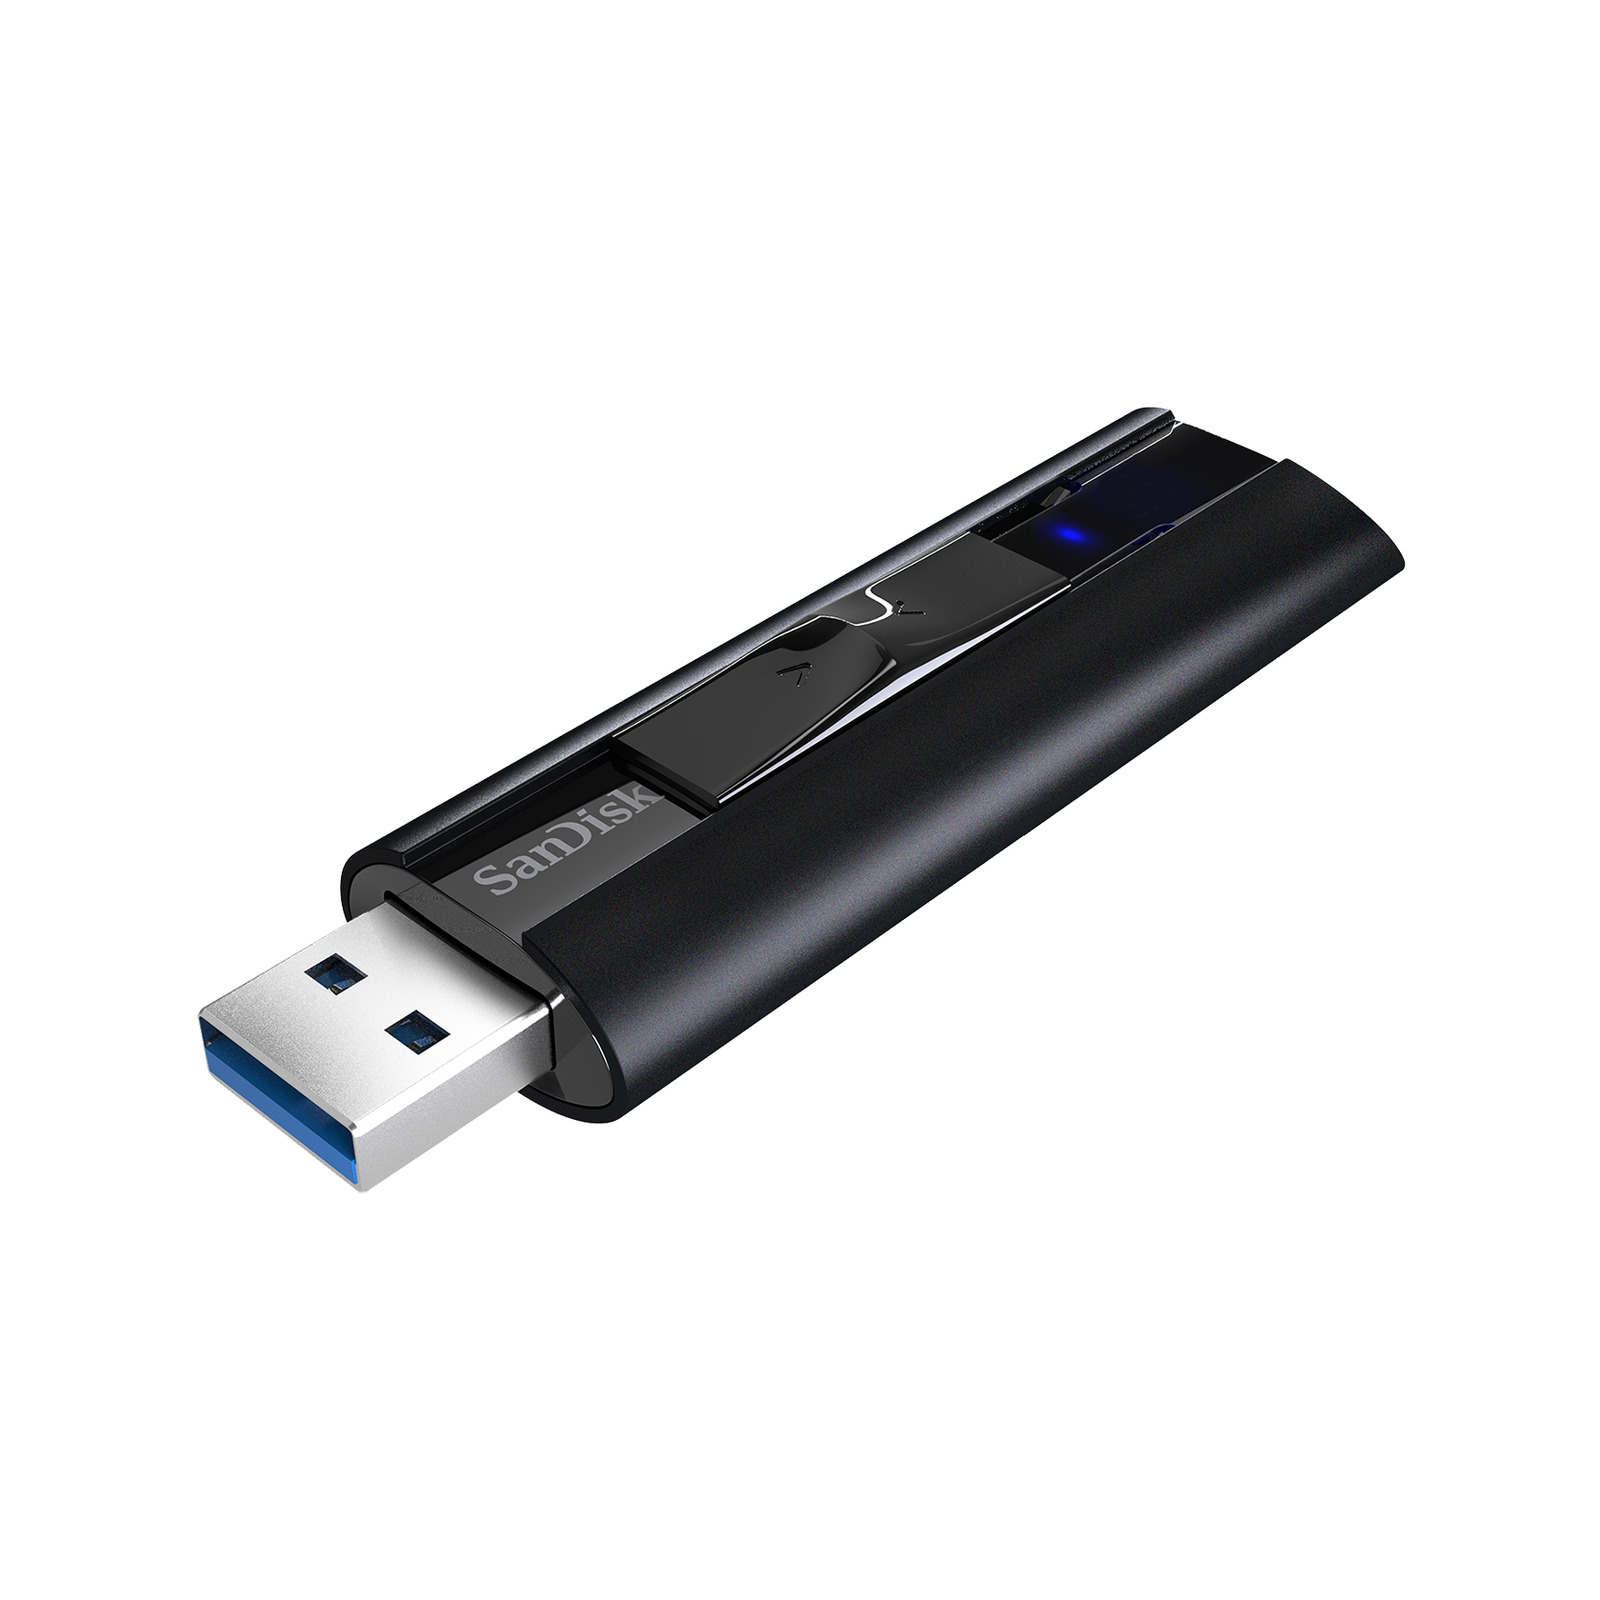 SanDisk 128GB Extreme PRO USB 3.2 Solid State Flash Drive - SDCZ880-128G-A46